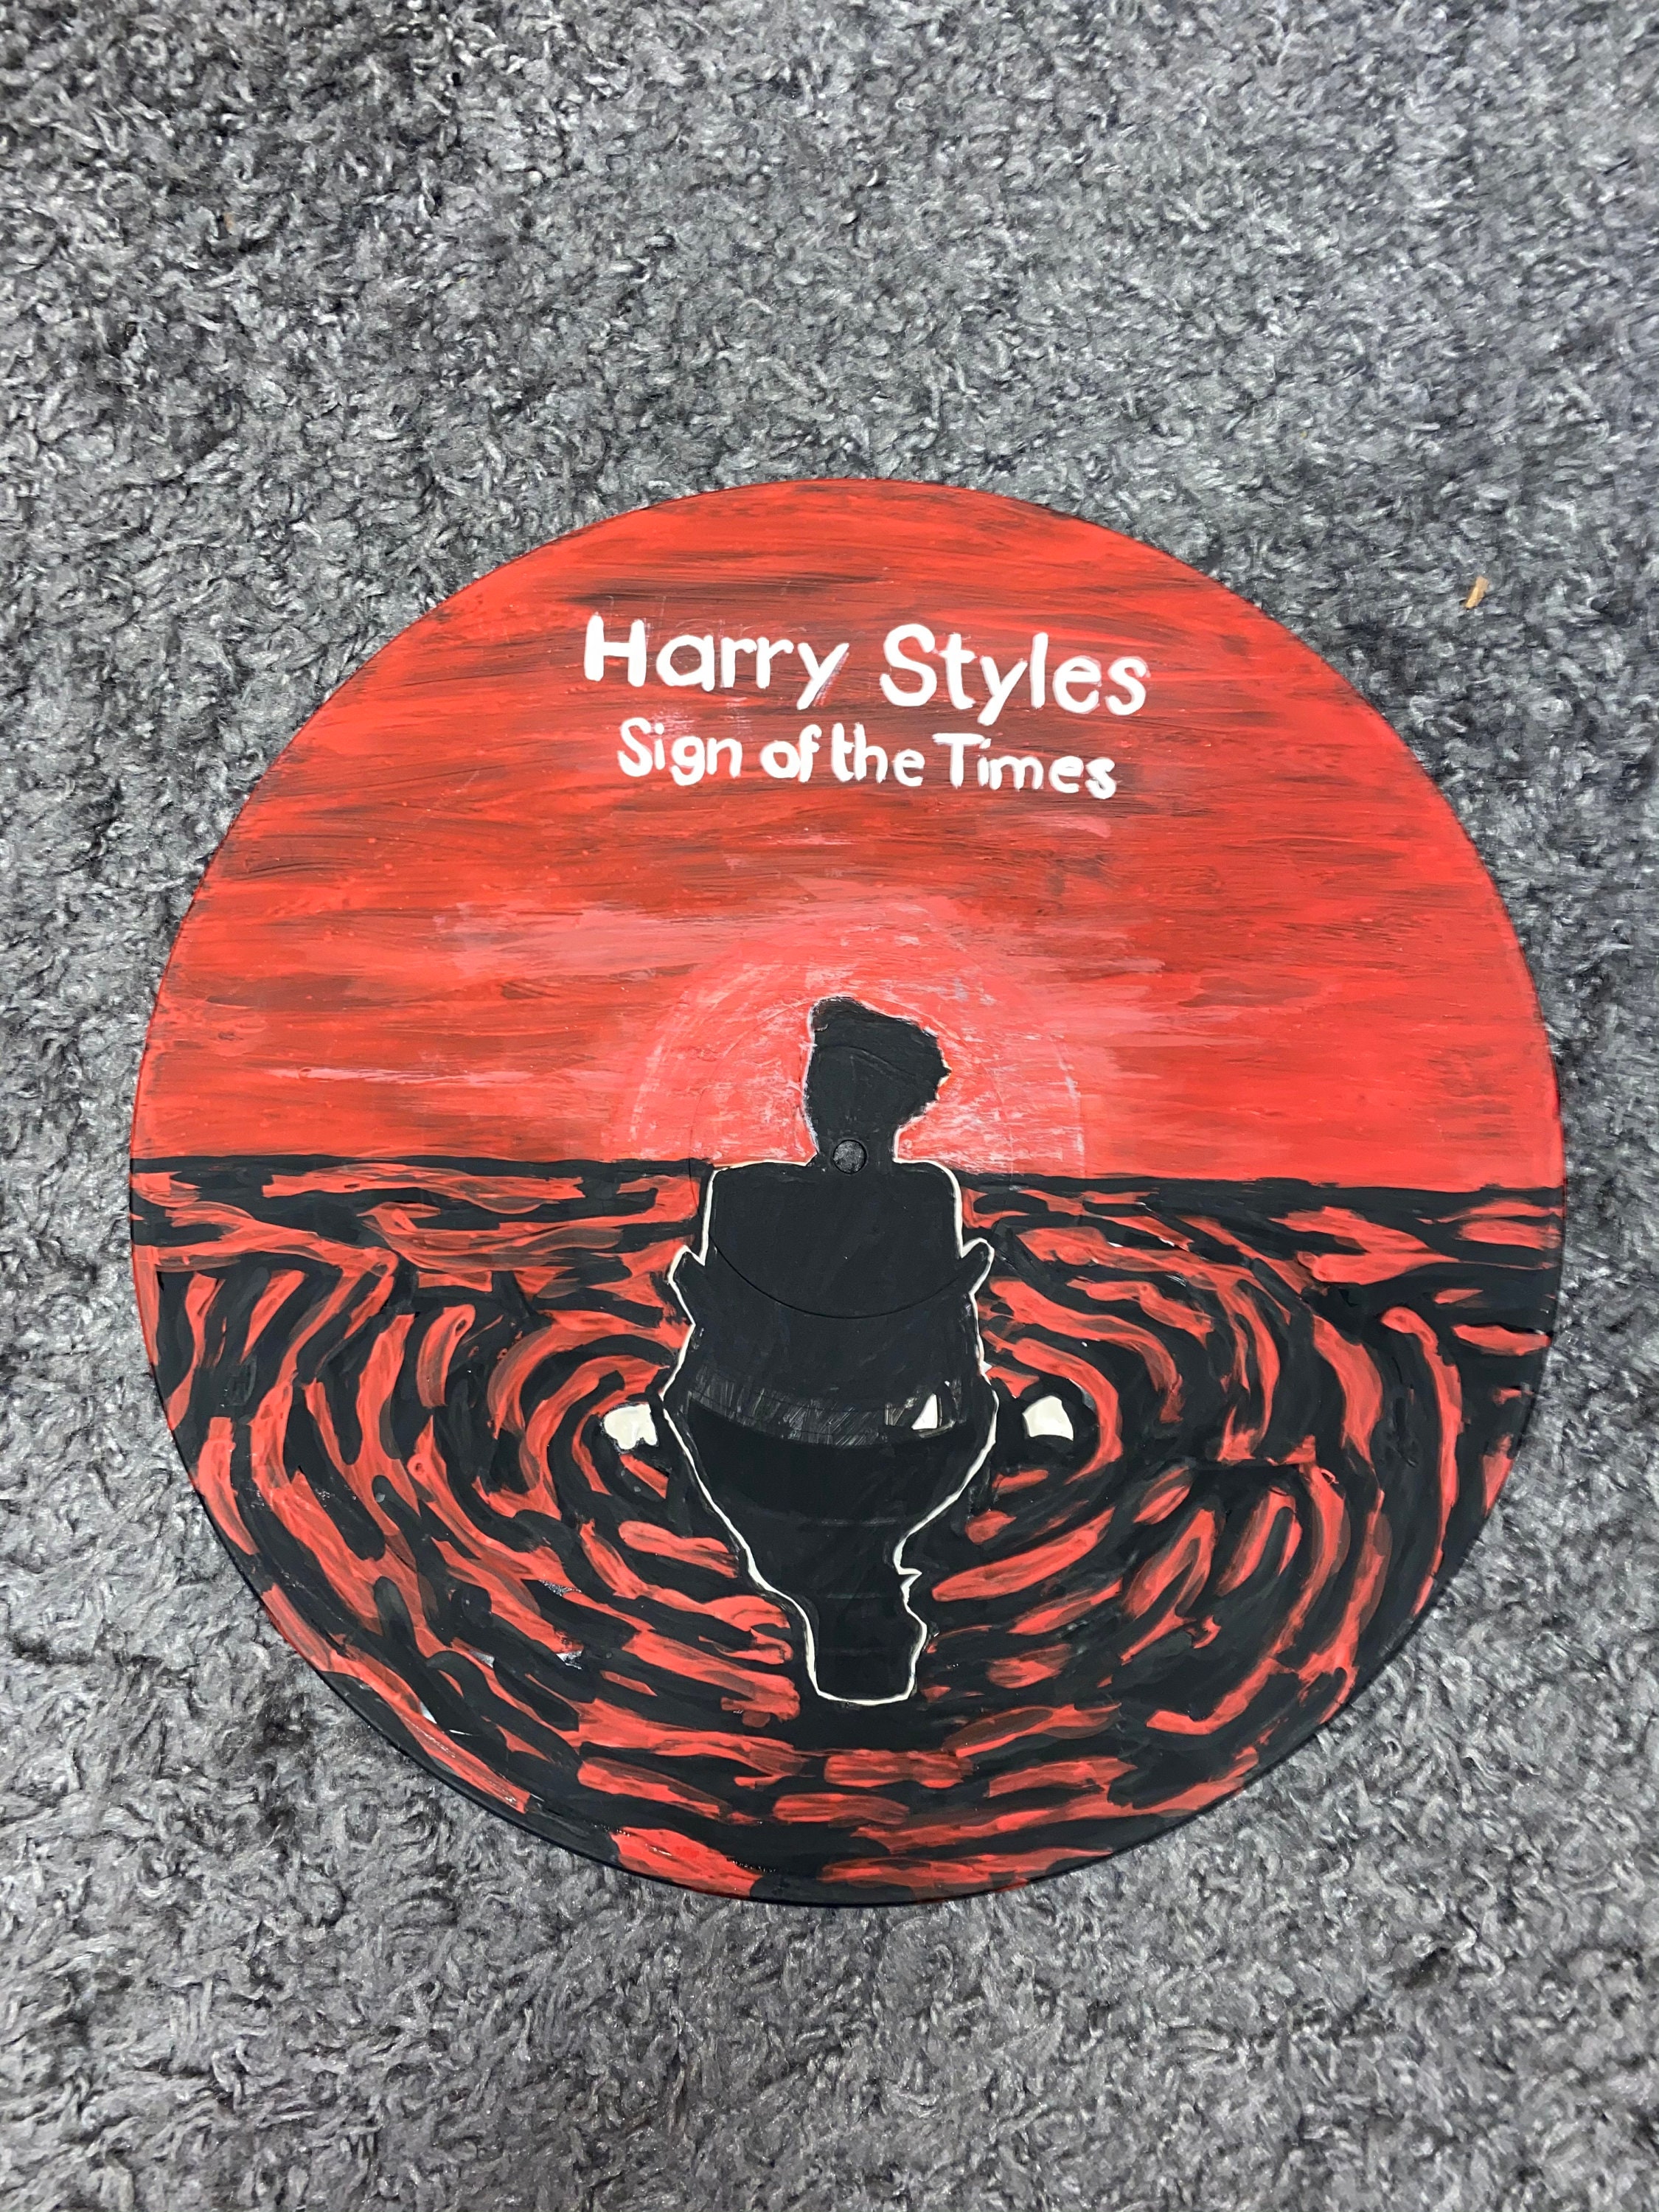 Harry Styles Sign of the Times Painted Vinyl Record